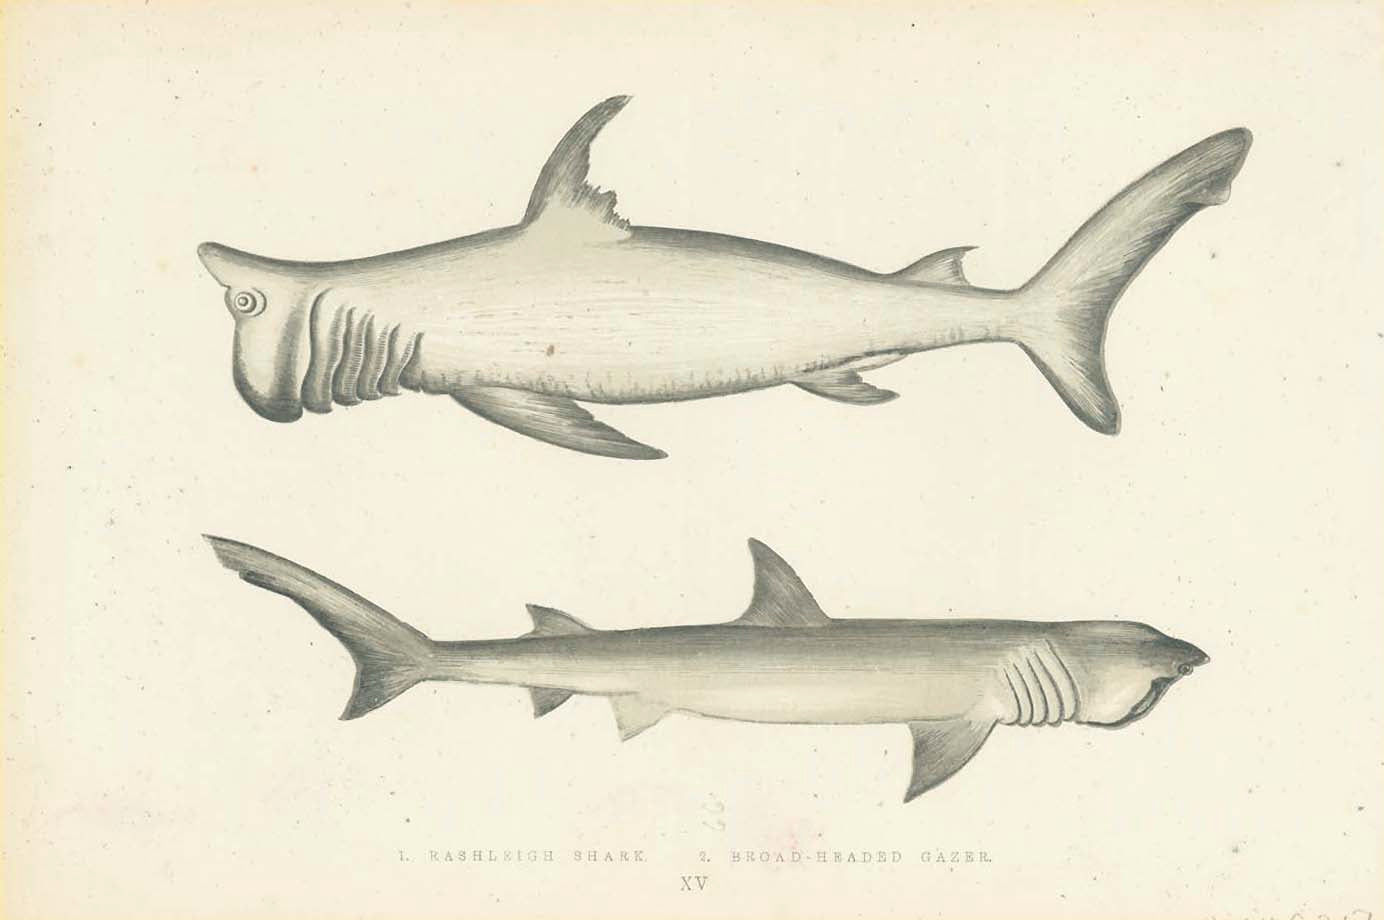 1. Rashleigh Shark  2. Broad-Header Gazer  Length of upper Fish. 17.5 cm (76.8")     Original hand-colored steel engraving by Jonathan Couch.  Published in London, 1870  Original antique print, interior design, wall decoration, ideas, idea, gift ideas, present, vintage, charming, special, decoration, home interior, living room design